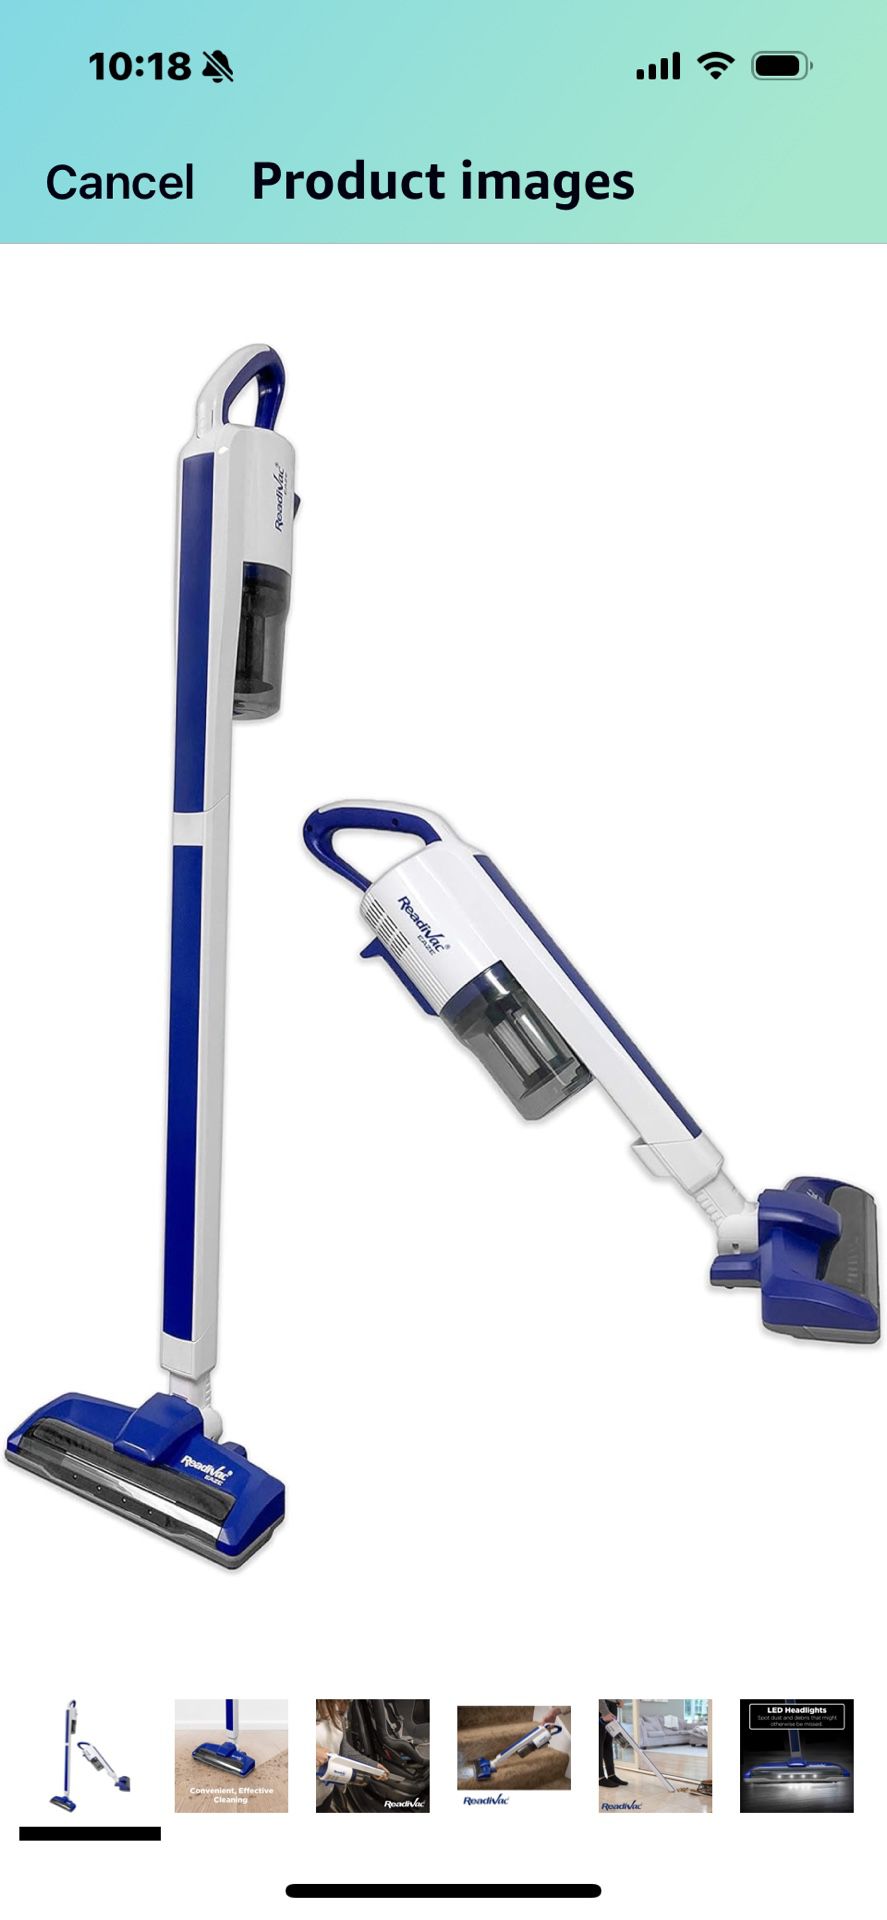 New In box! ReadiVac Eaze Cordless Stick Vacuum Cleaner, Blue